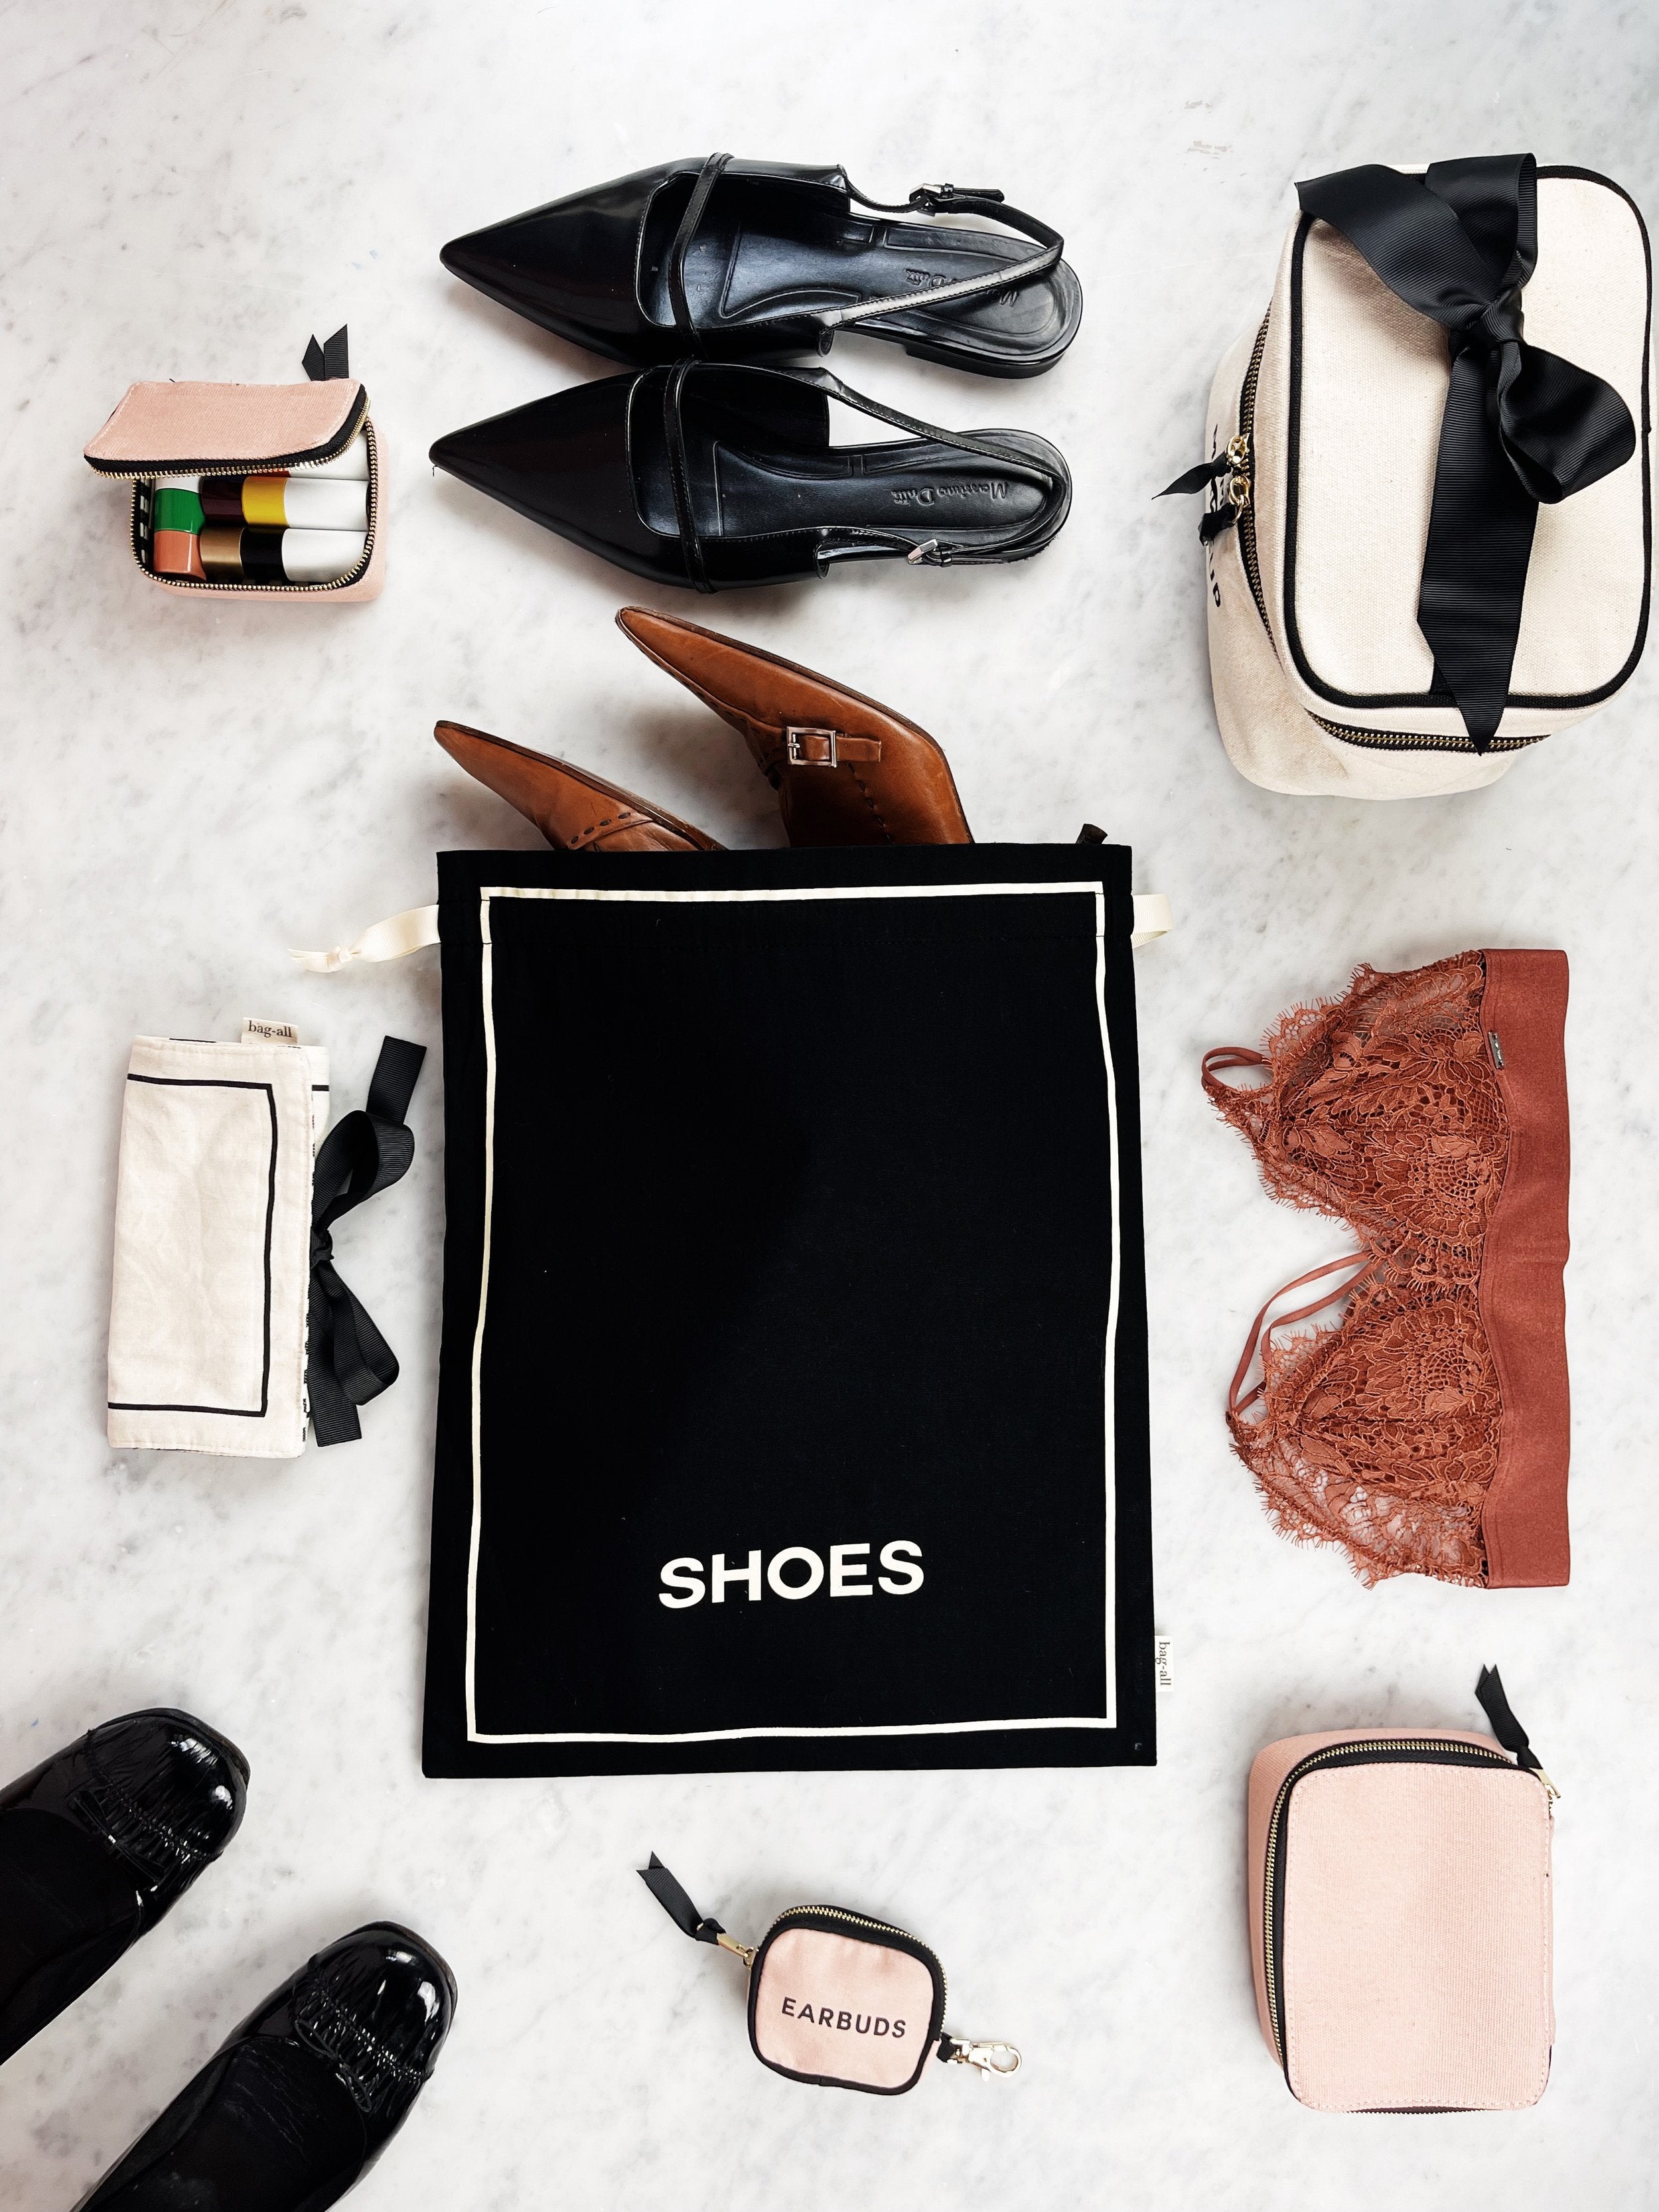 Step into Organization with the New Shoe Organizing Bag